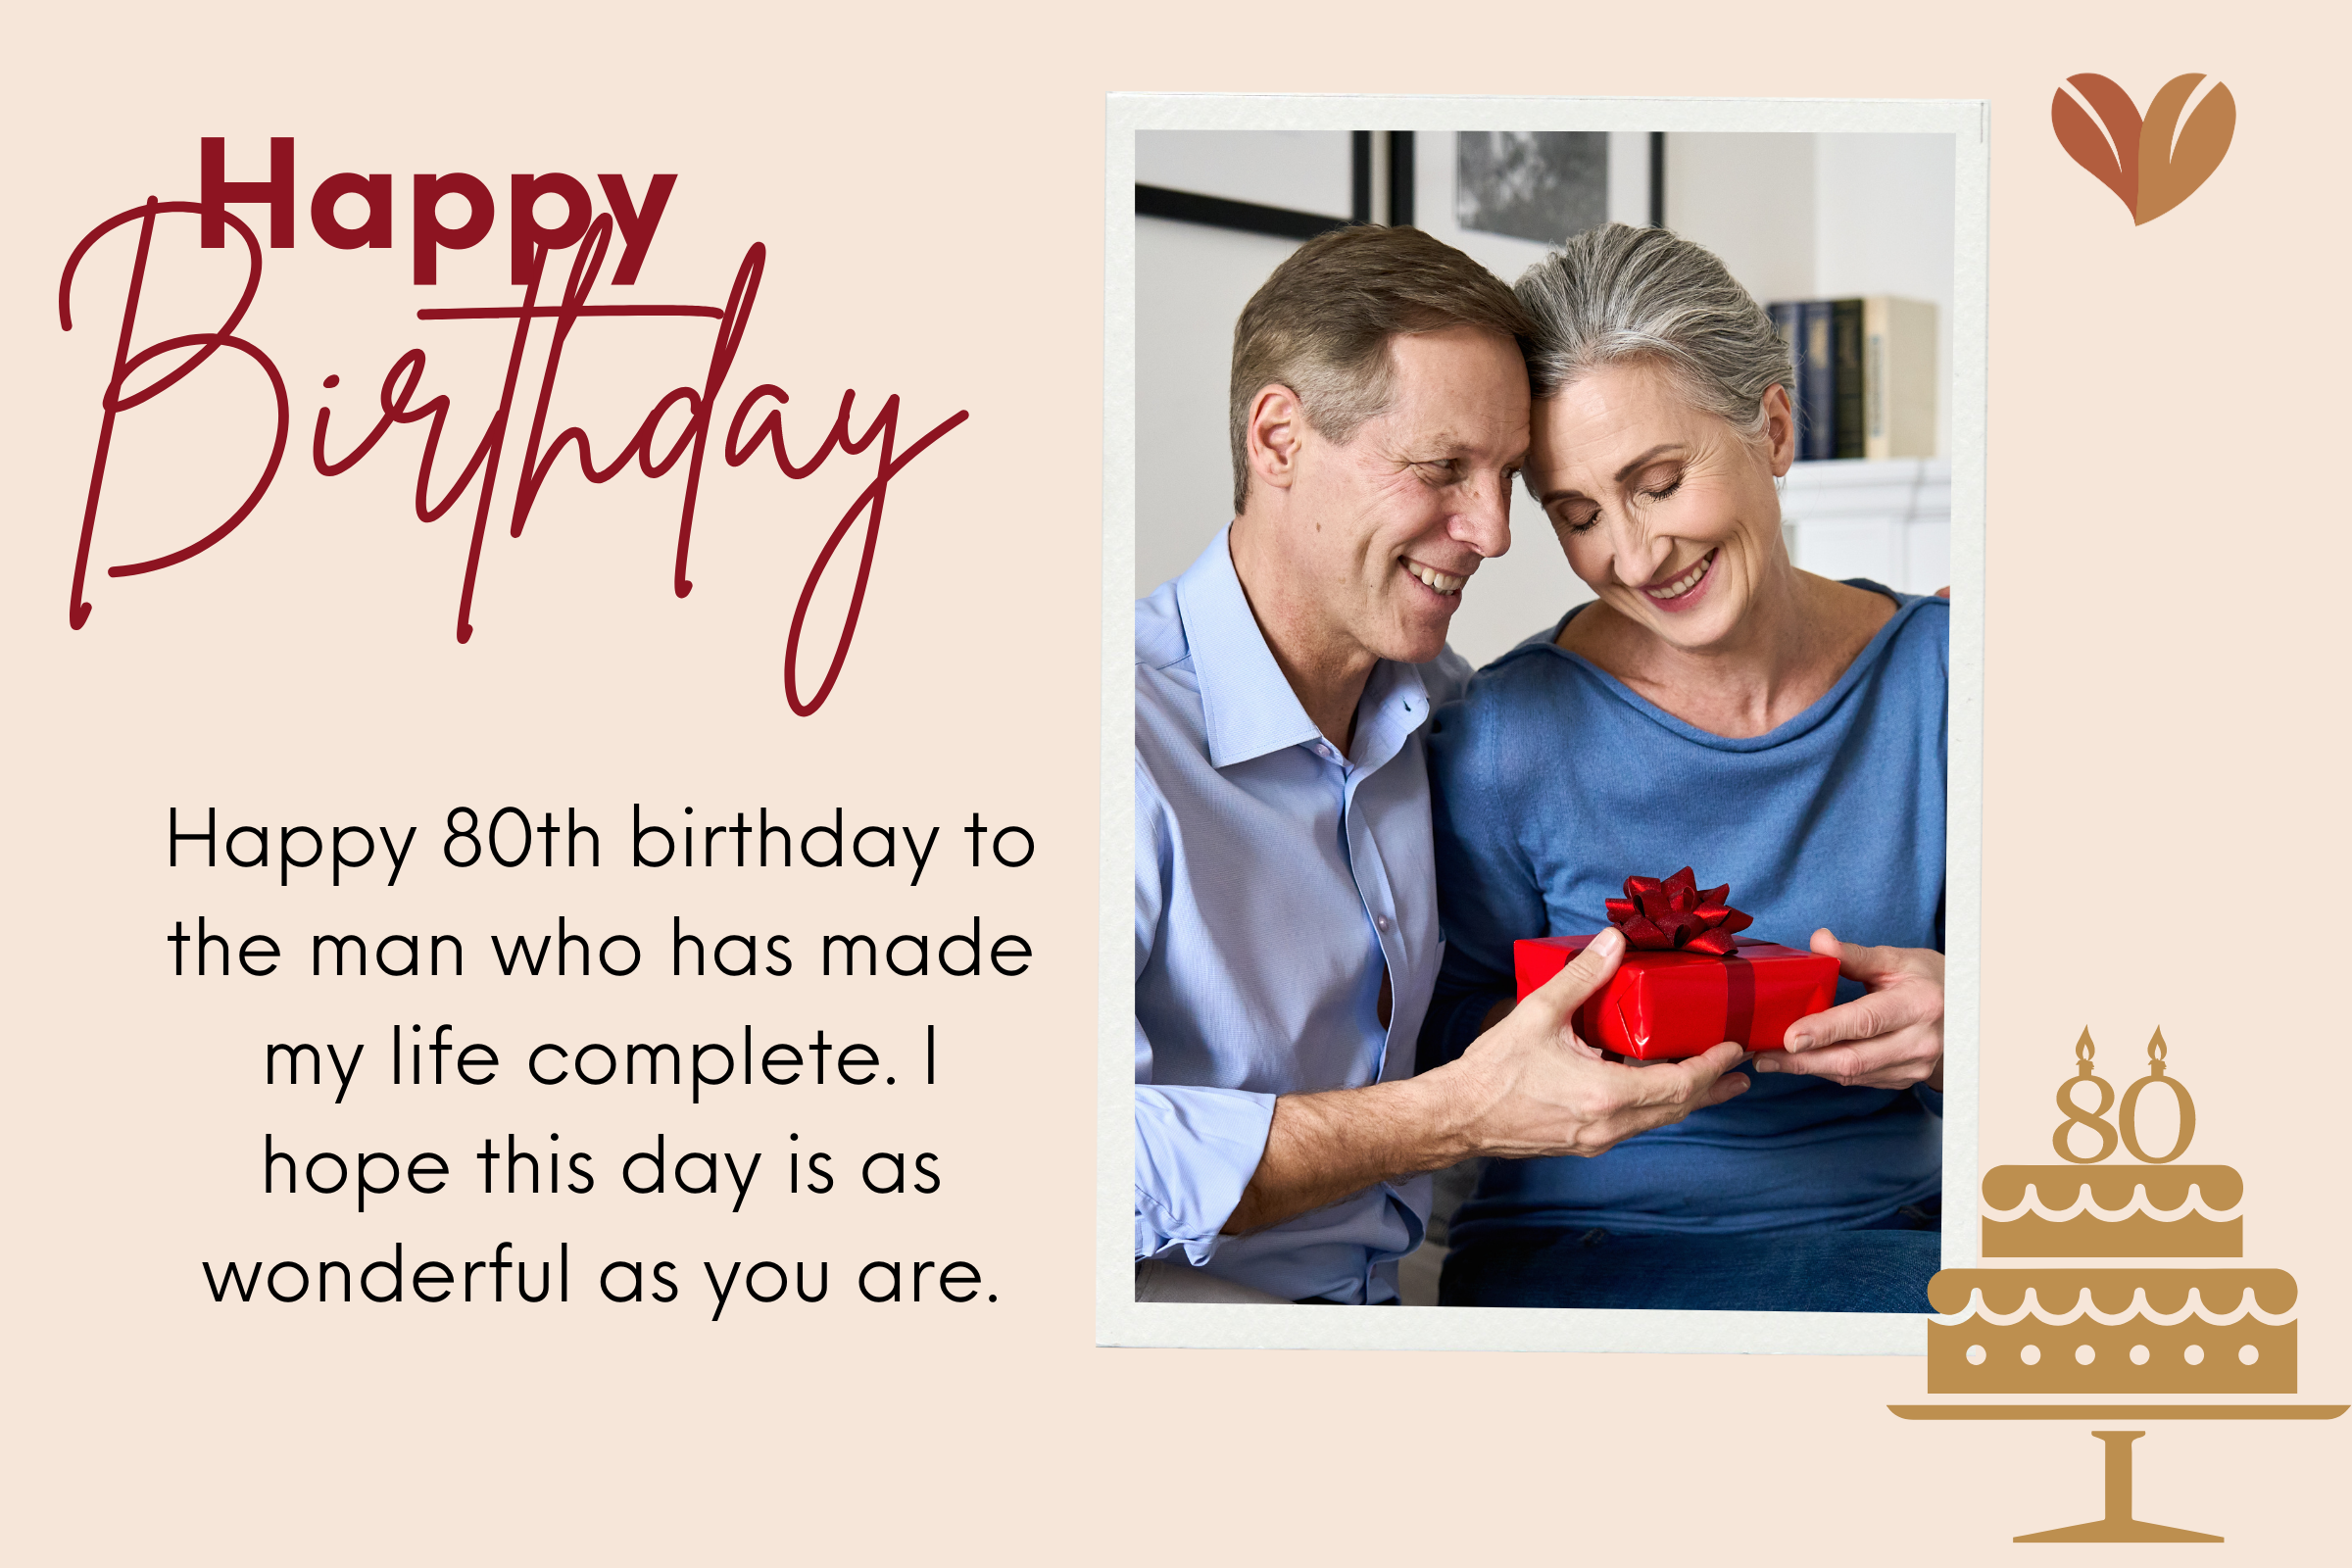 Warmest congratulations on your 80th birthday! May this special day bring you immense joy and fulfillment!